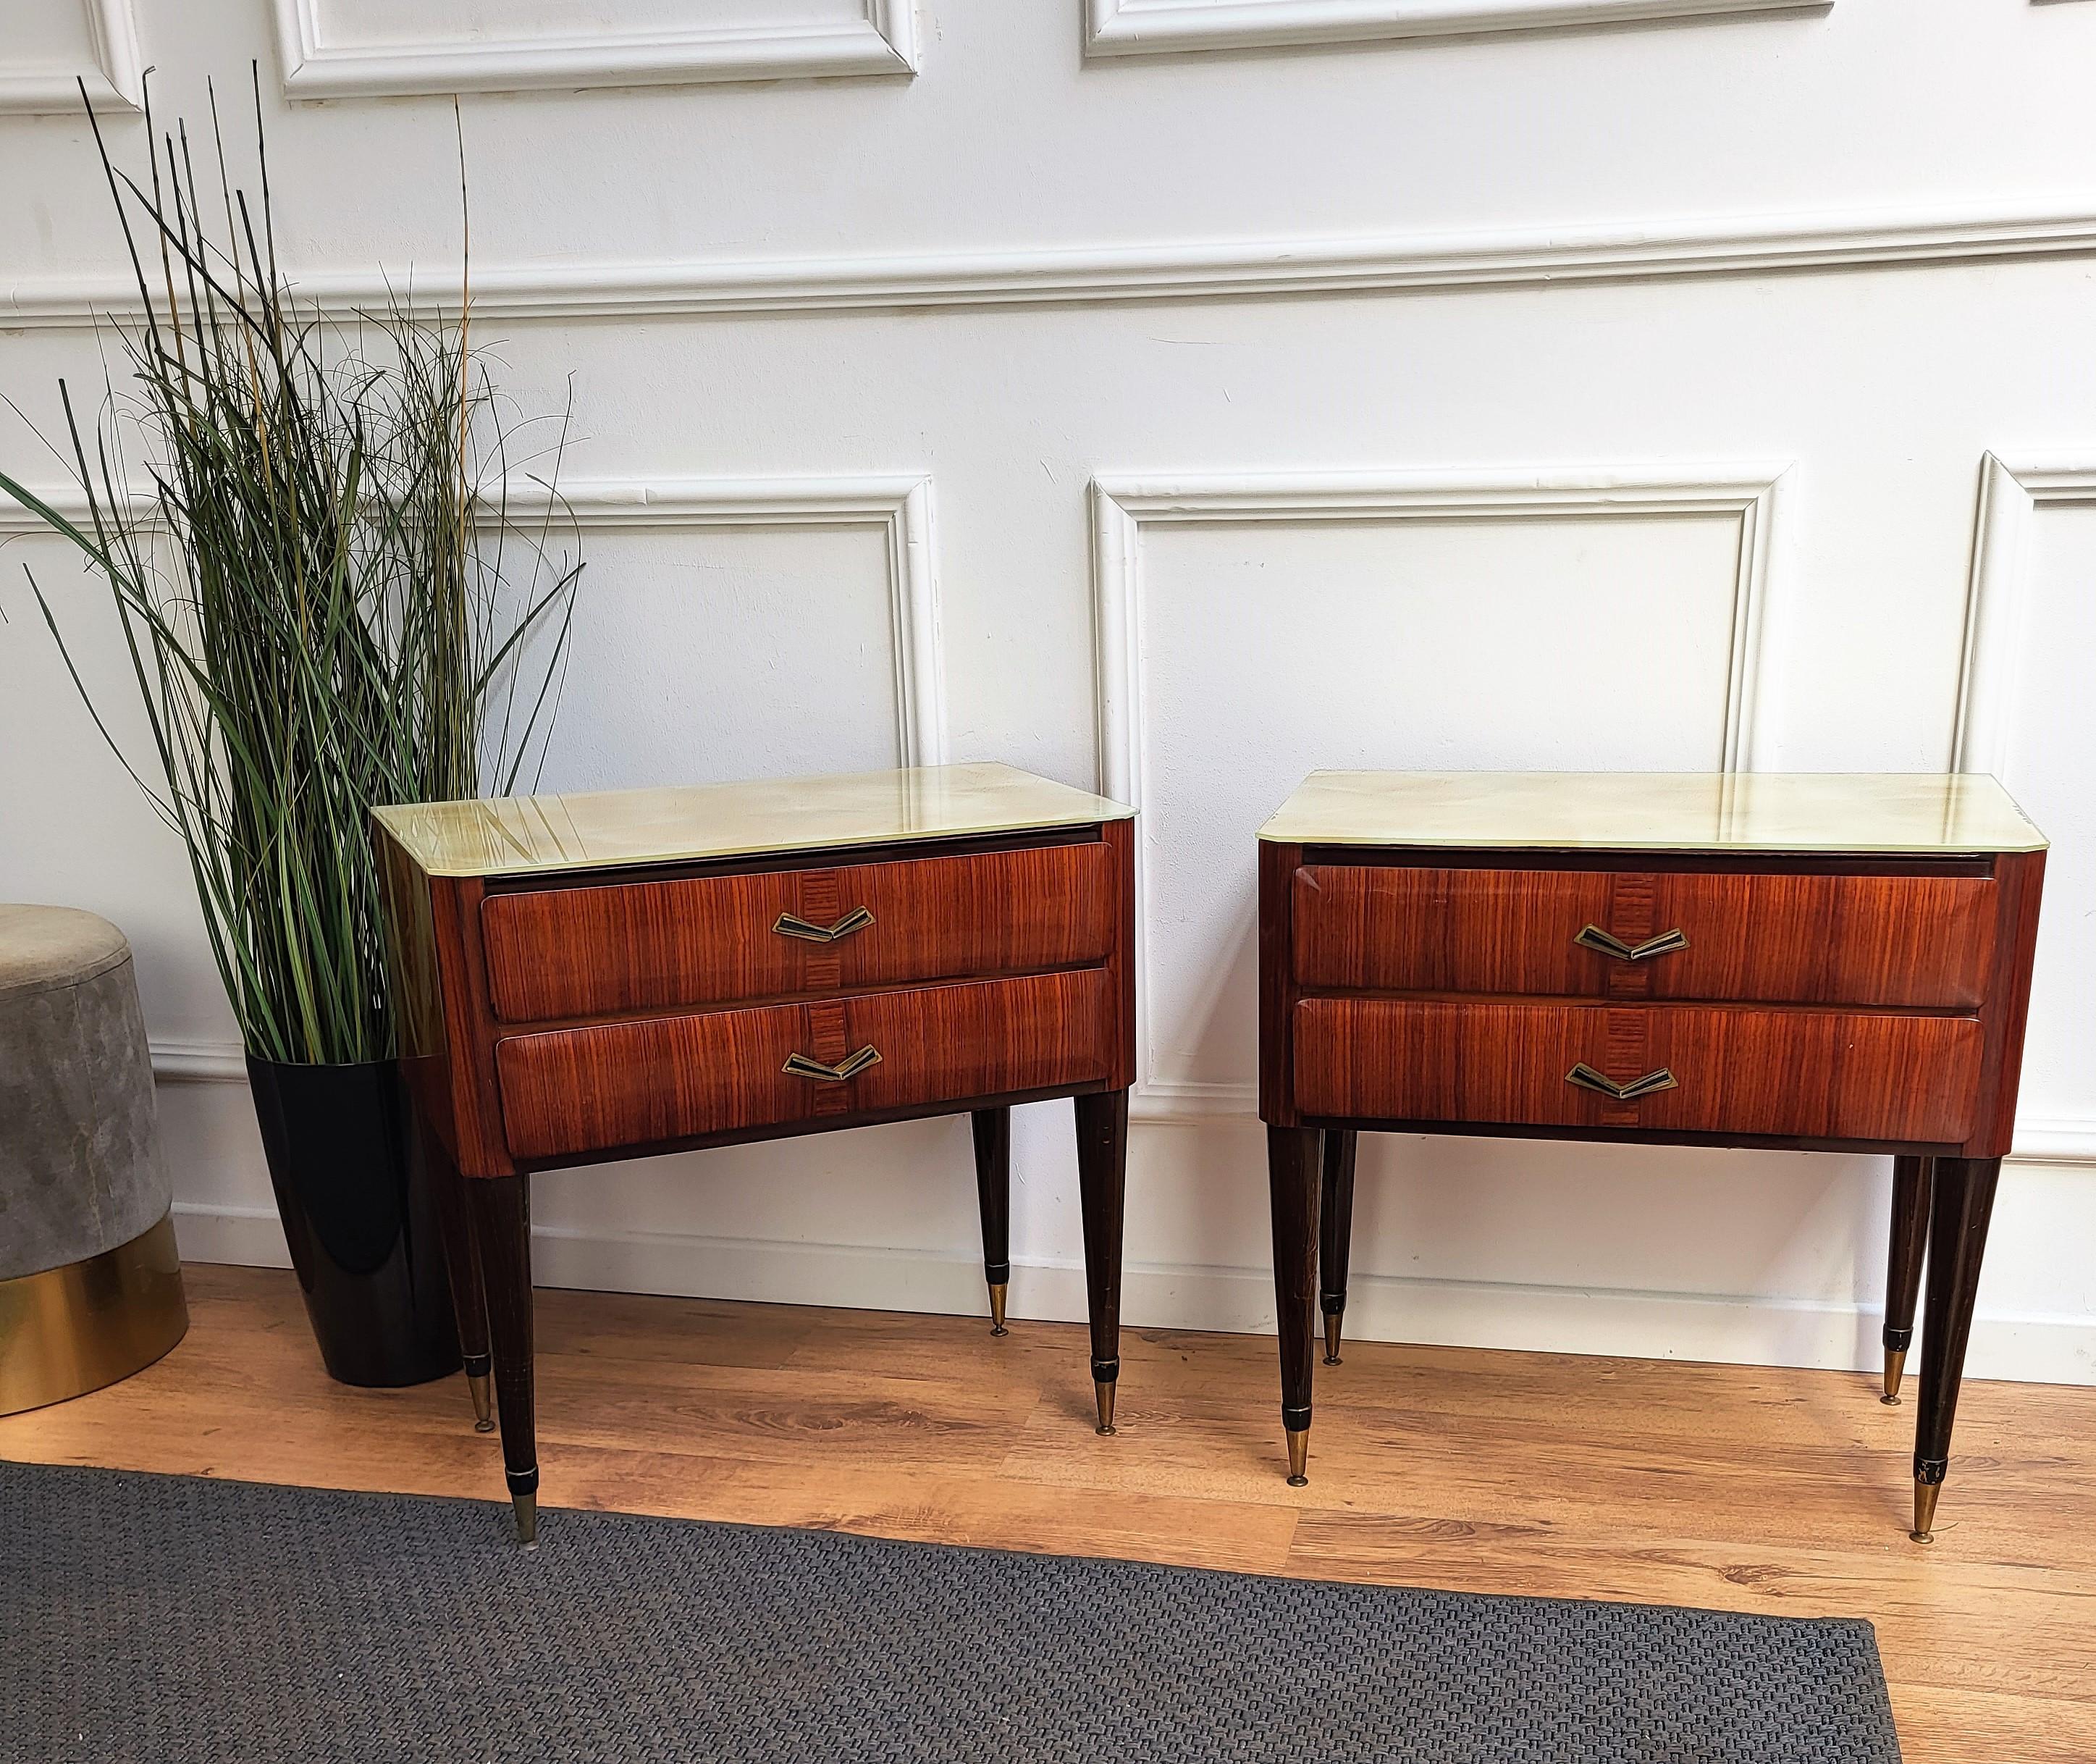 Very elegant and refined Italian 1950s neoclassical pair of bedside tables with double front drawers and great pattern design of the walnut veneer wood and lacquered glass top. Great details such as the brass handles make those nightstands a great